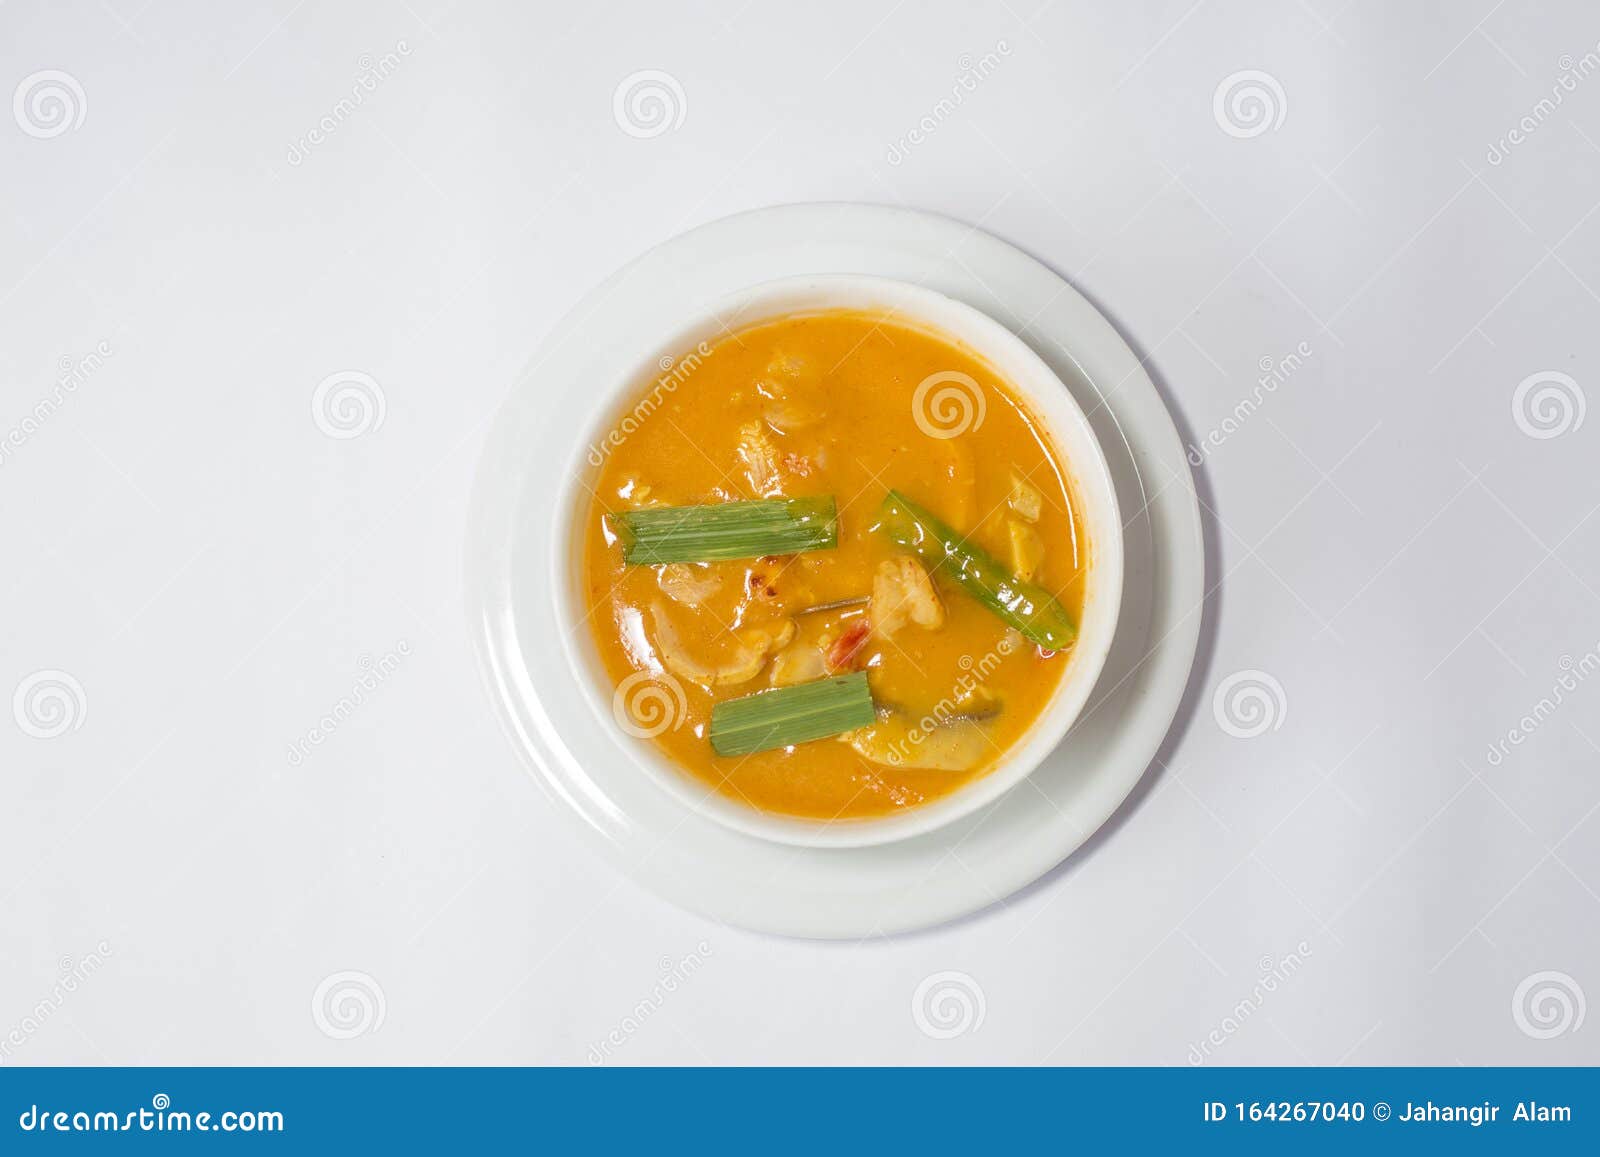 Hot and Spice Thai Soup on a White Bowl. Top View Stock Photo - Image ...